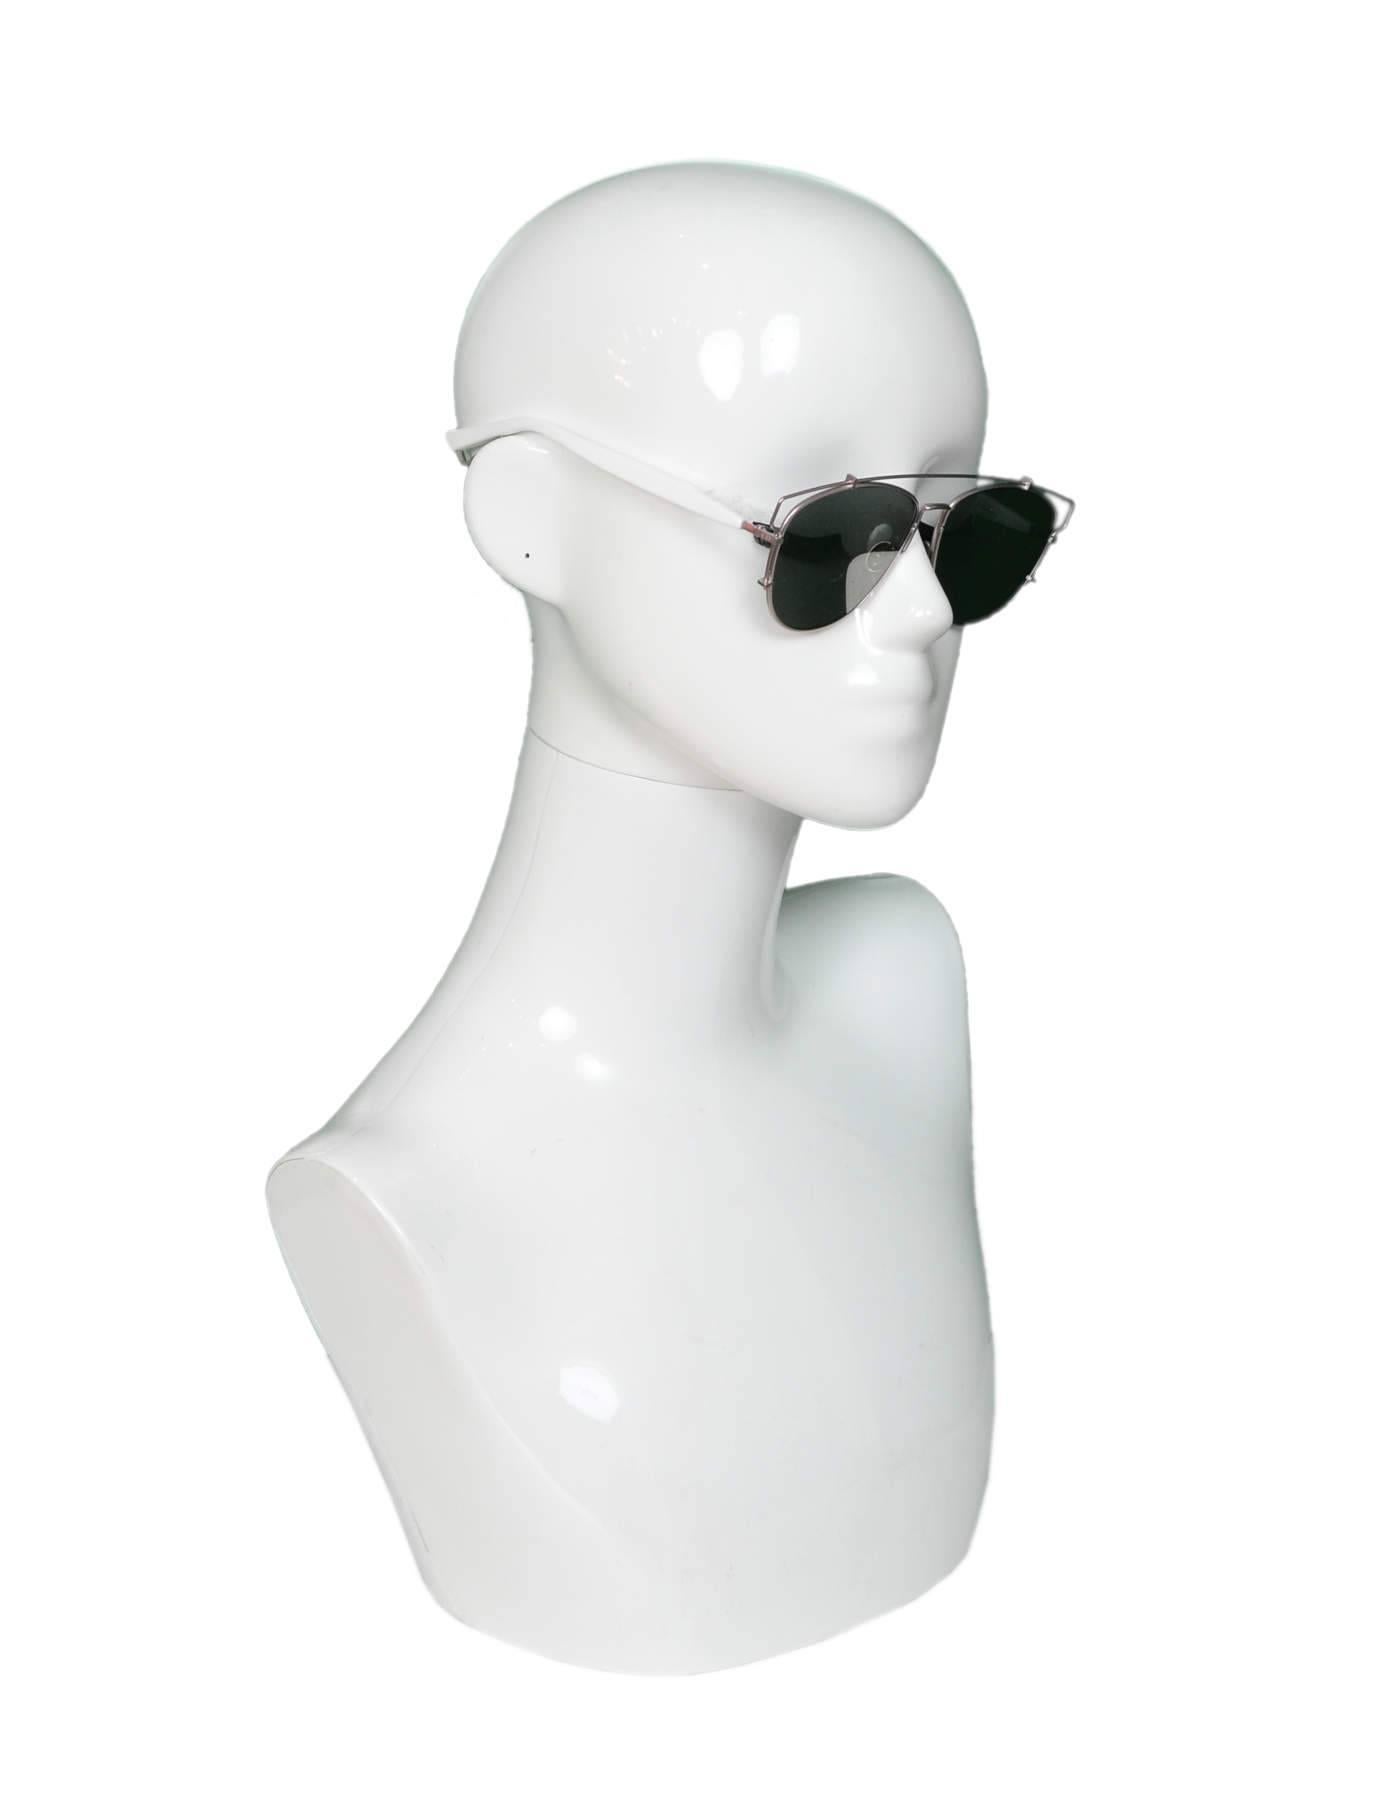 Christian Dior White & Pink Technologic Sunglasses

 Made In: Italy
Color: White, pink
Materials: Metal, resin
Retail Price: $635 + tax
Overall Condition: Excellent pre-owned condition with the exception of some marks throughout
Includes: Christian